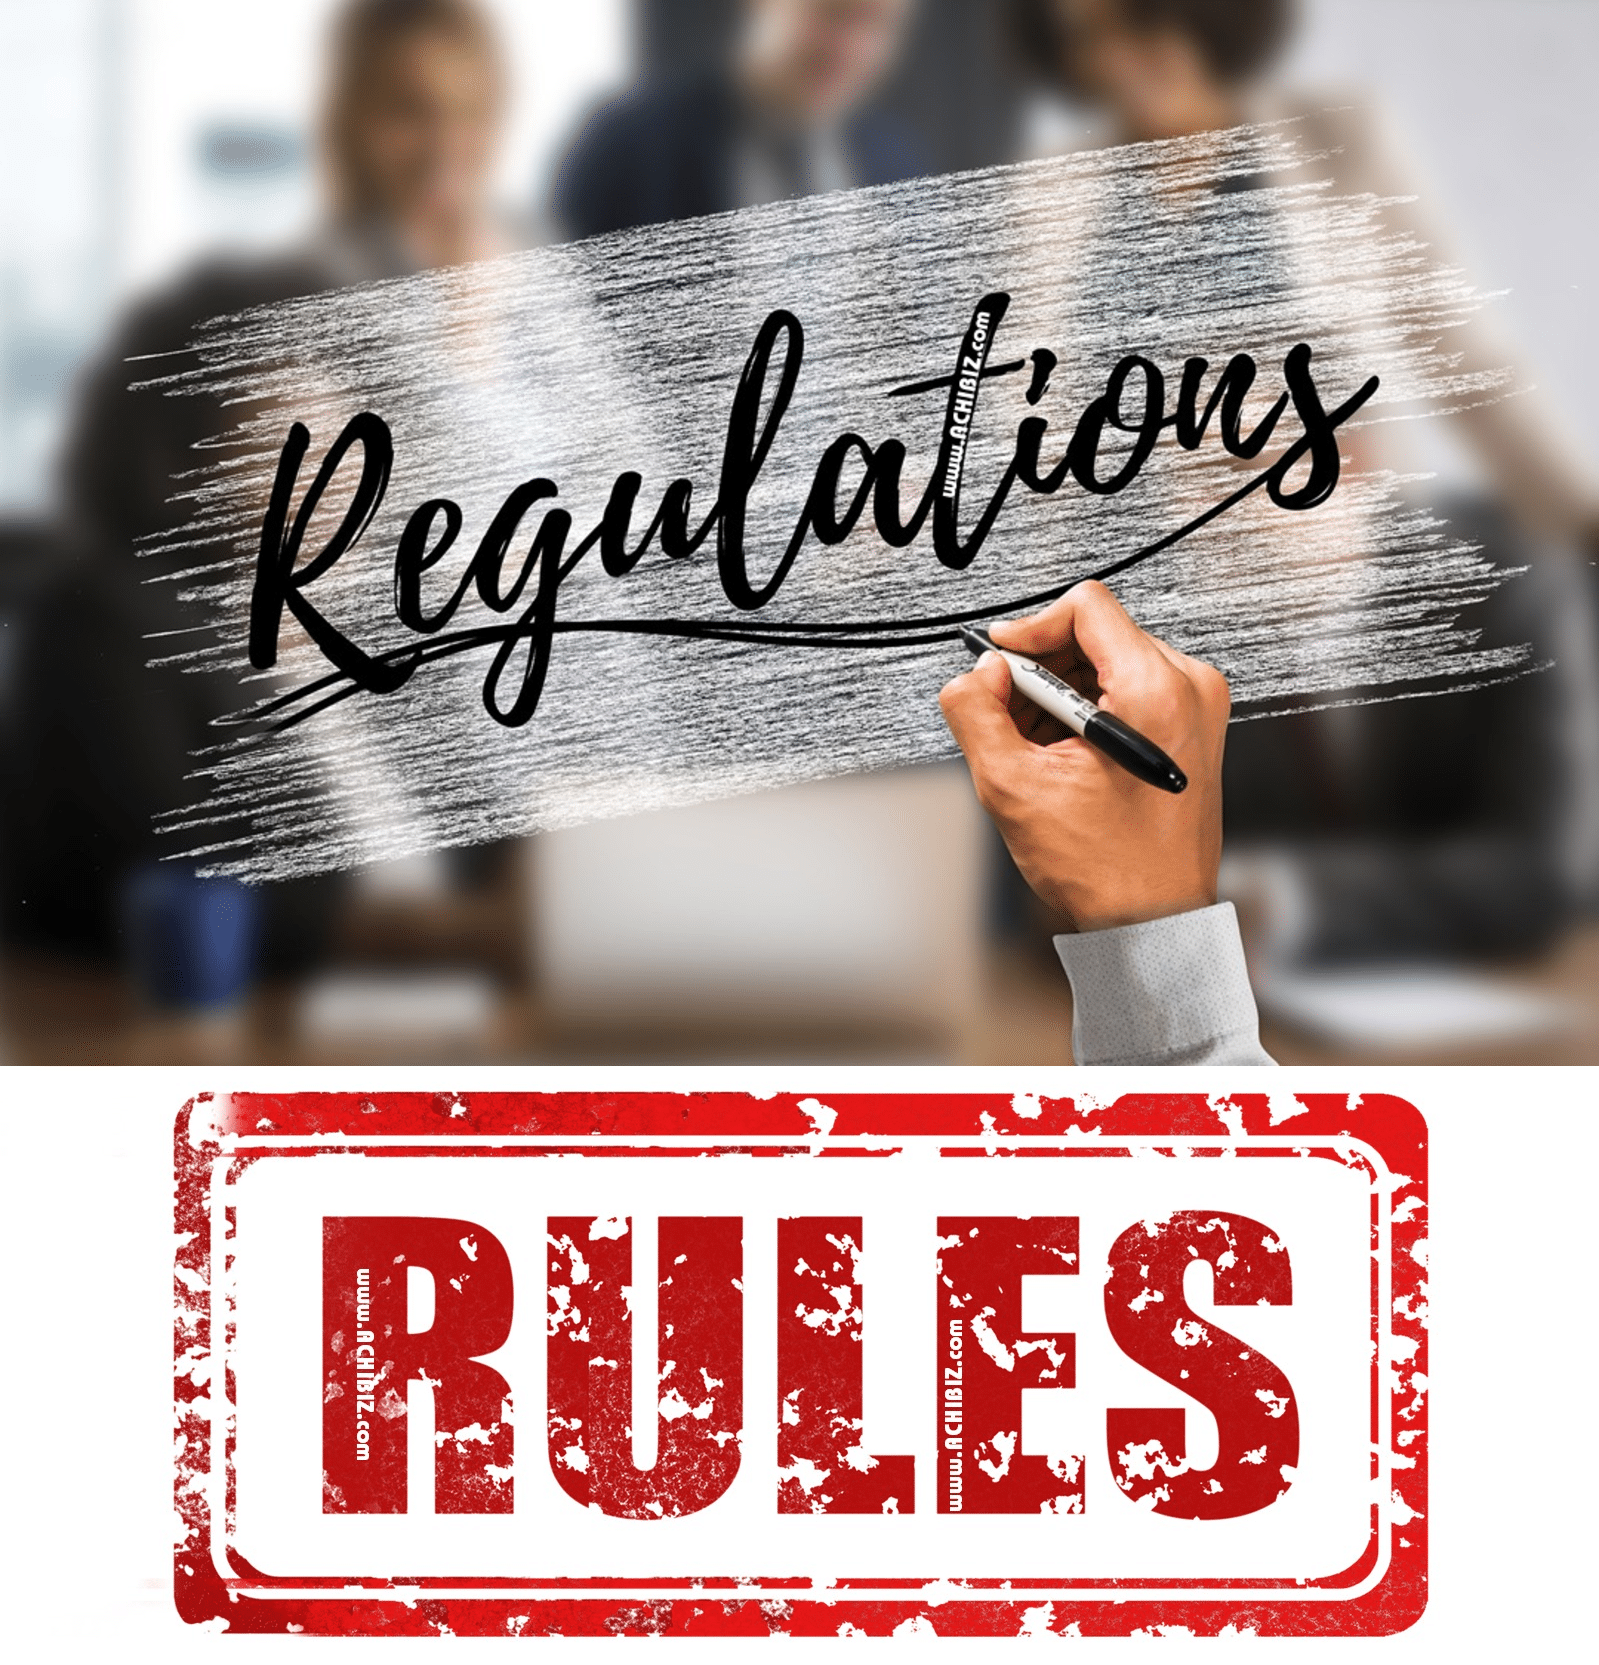 Hand writing of Regulations and Rules